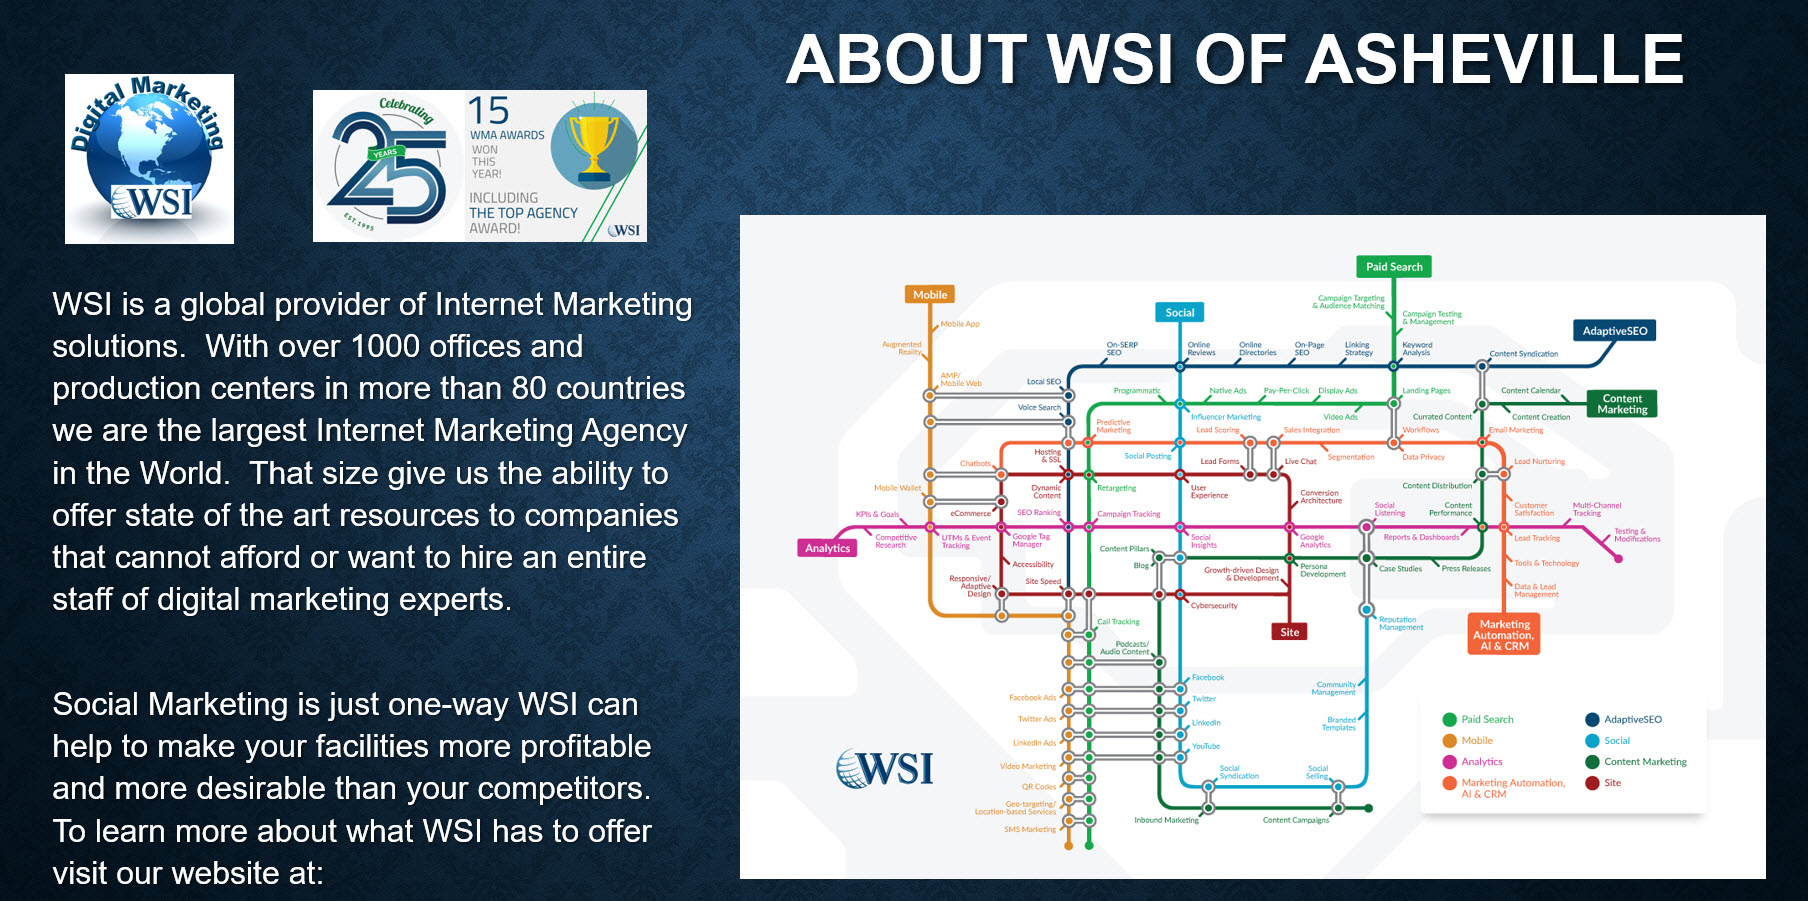 About WSI